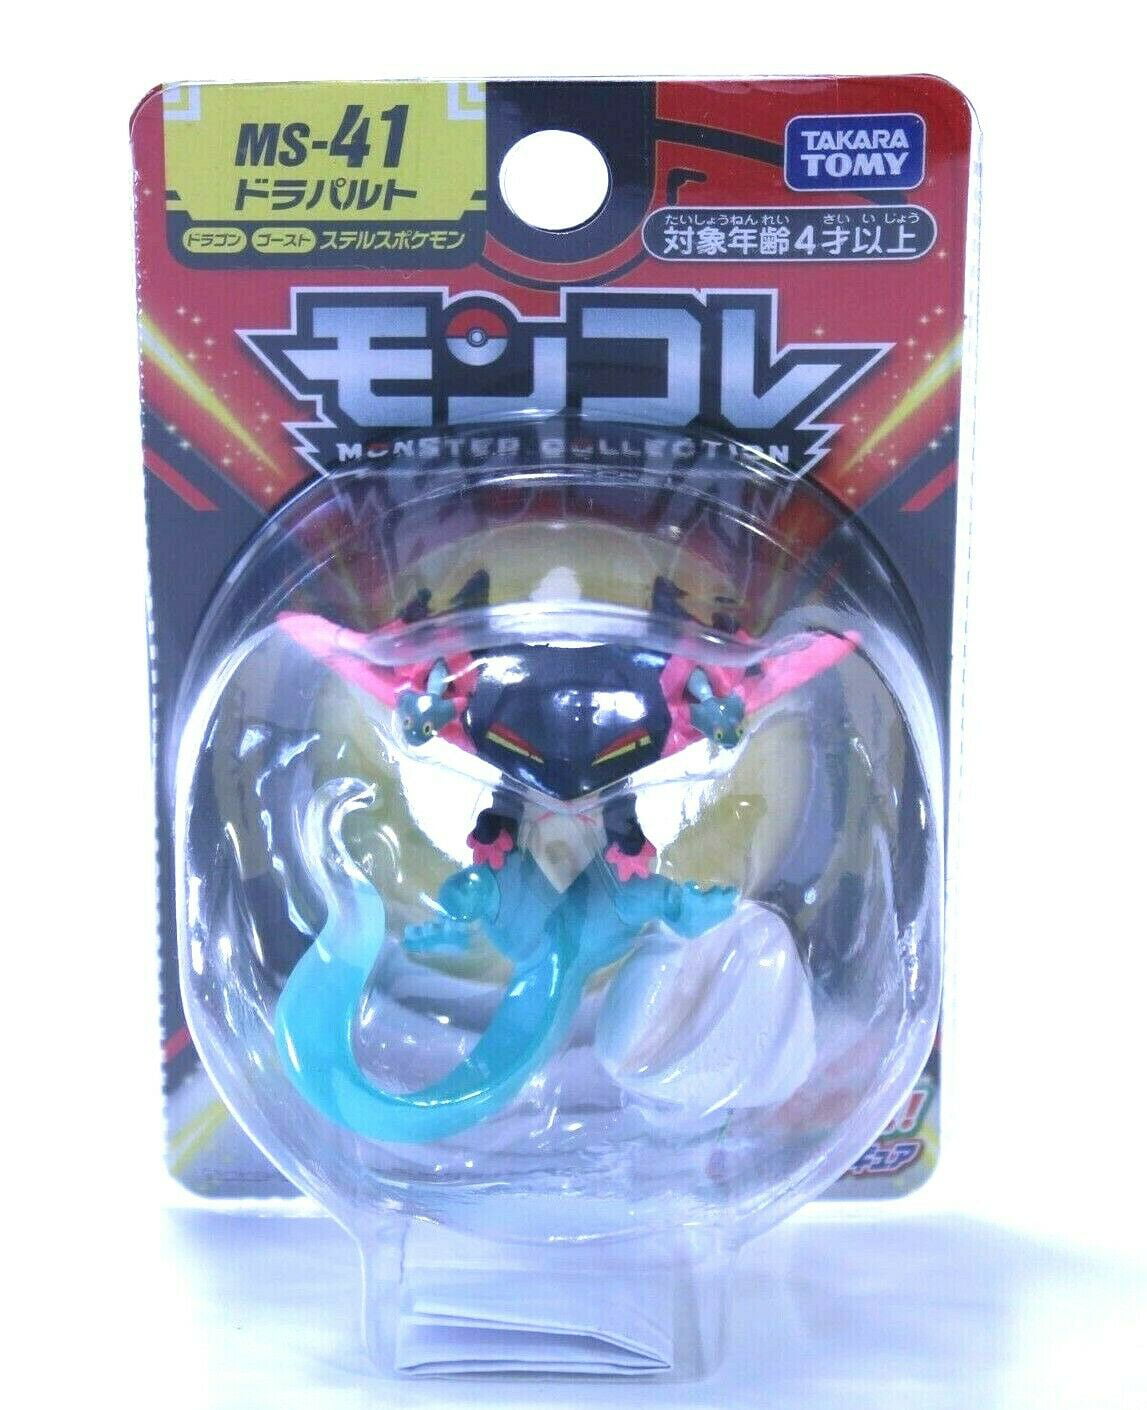 MS-13 2 Inch Figure TOMY Japan Import US Ship Pokemon Moncolle Squirtle 